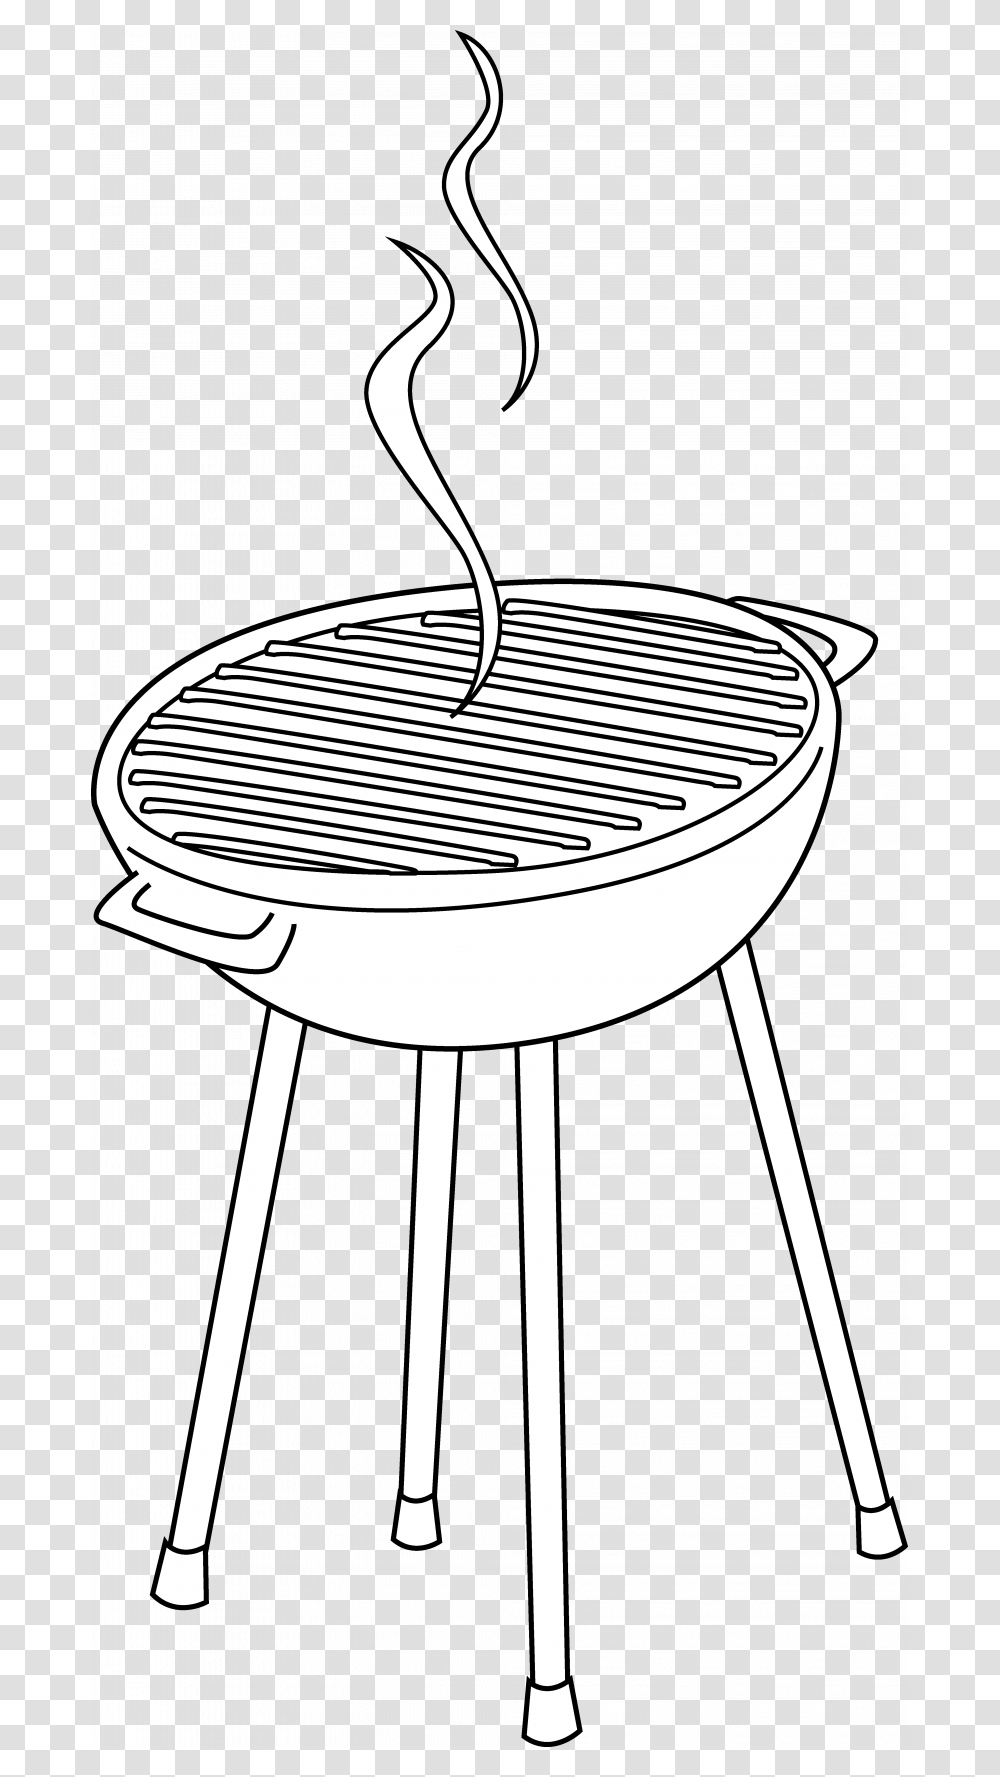 Barbeque Grill Clip Art Free Barbecue Grill Clipart Black And White, Furniture, Chair, Cradle, Lamp Transparent Png